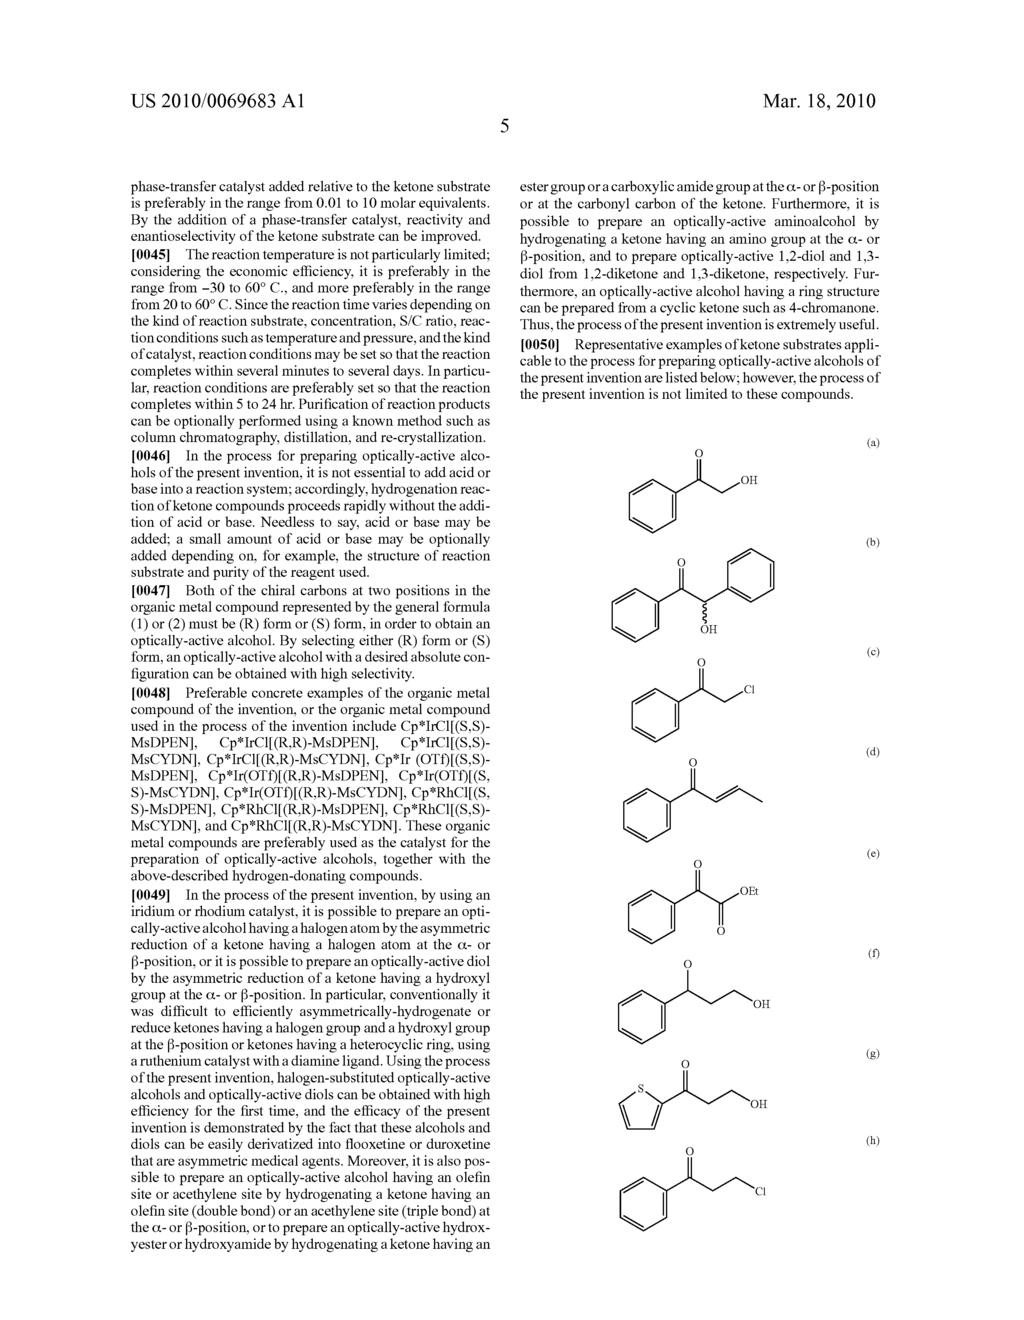 Organic metal compound and process for preparing optically-active alcohols using the same - diagram, schematic, and image 06